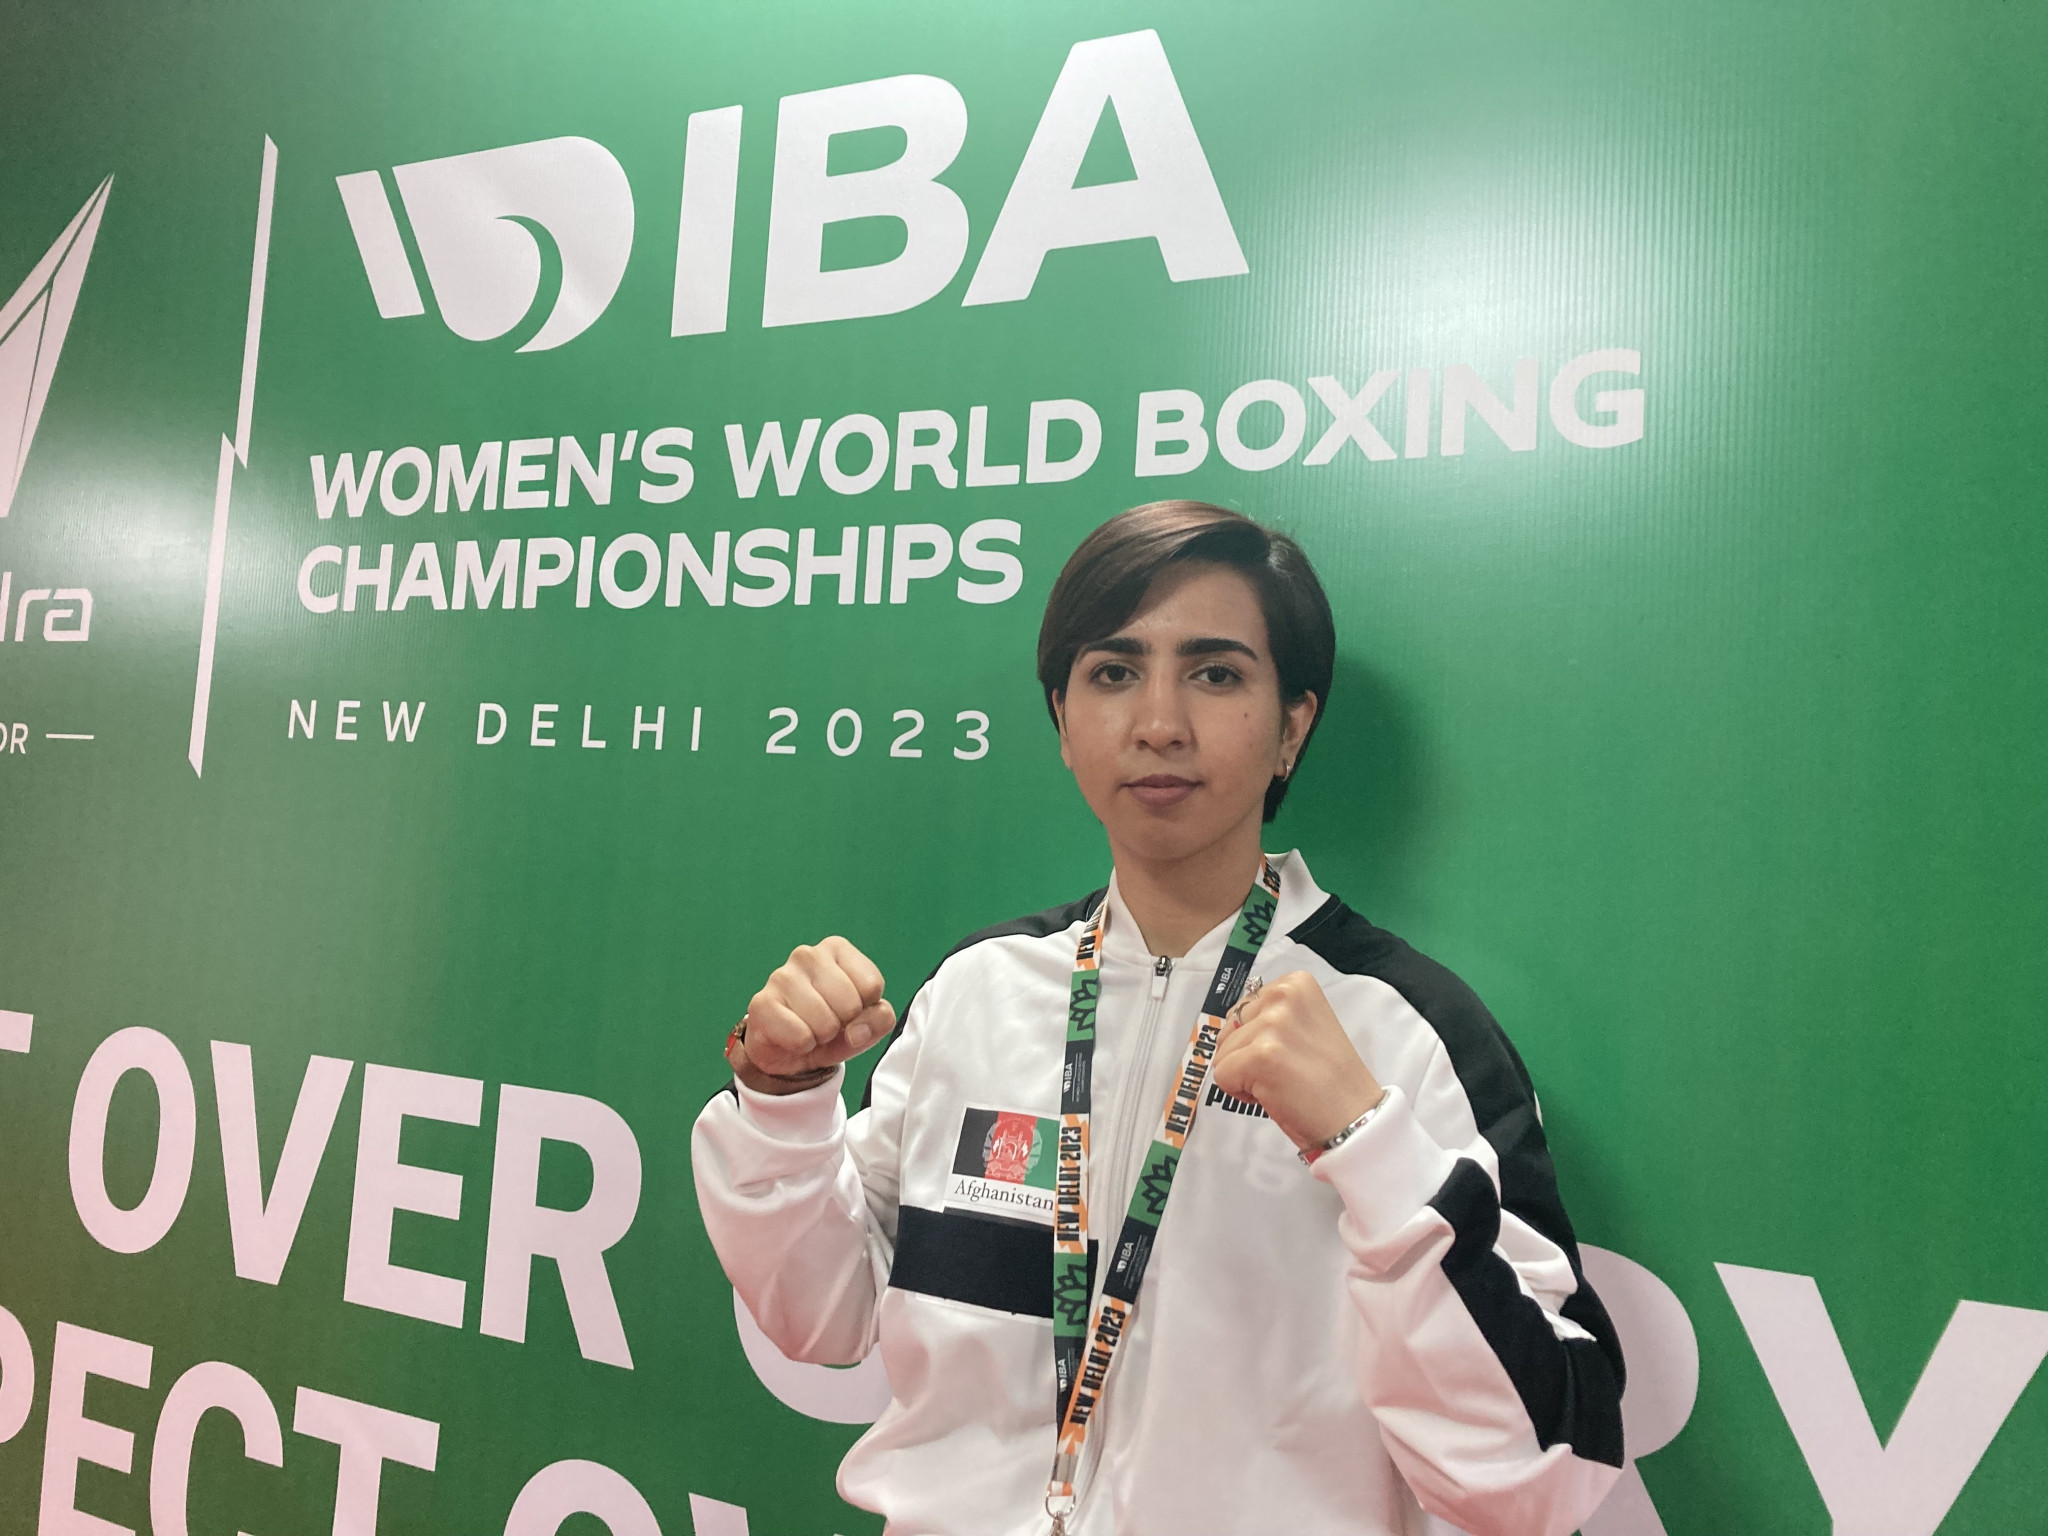  Sadia Bromand is the only boxer representing Afghanistan at the IBA Women's World Championships in New Delhi ©IBA